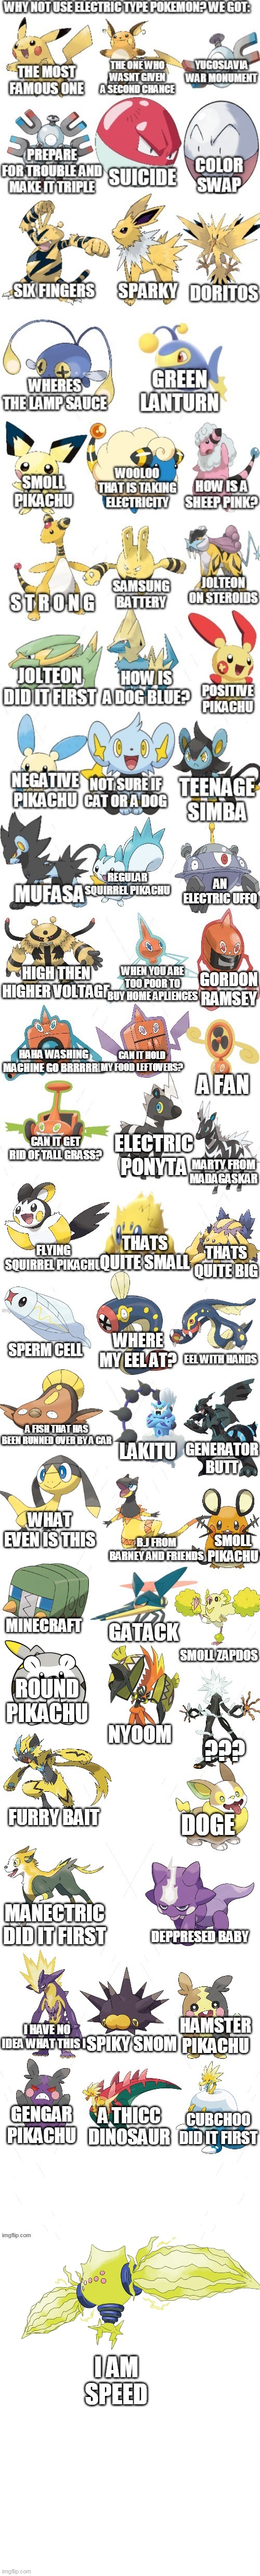 electric type pokemon be like | I AM SPEED | image tagged in memes,funny,pokemon | made w/ Imgflip meme maker